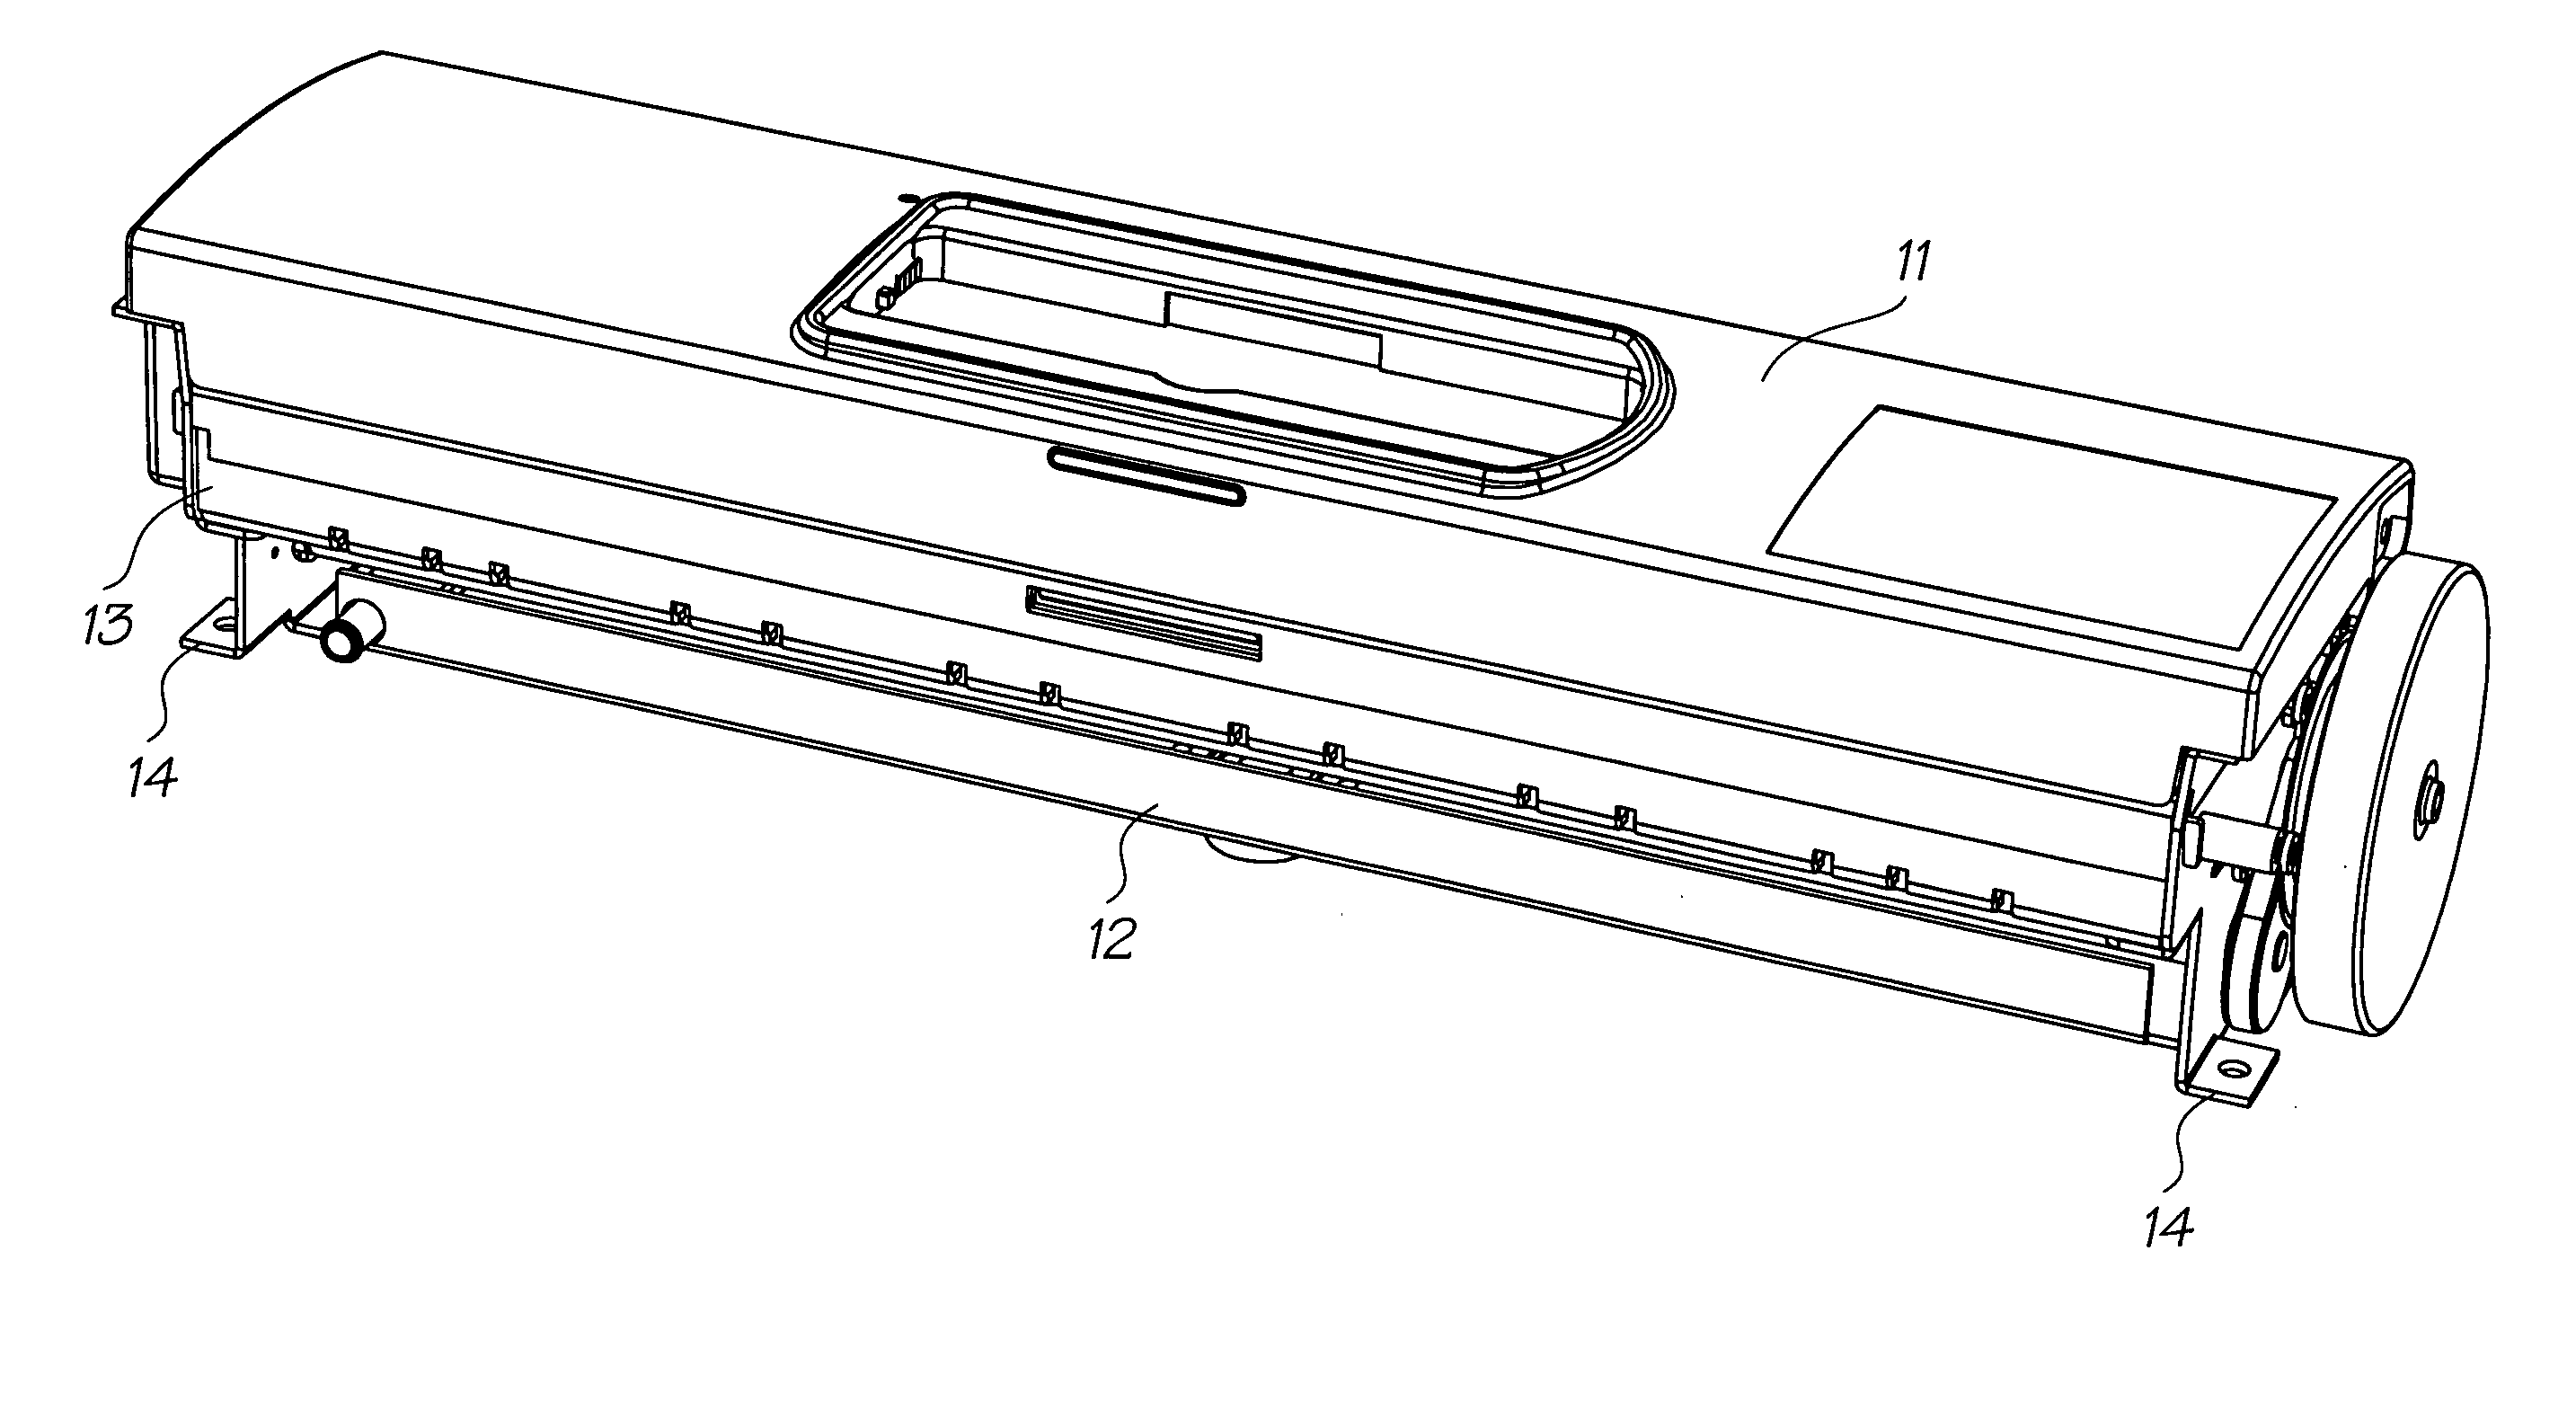 Method of refilling a high speed print engine